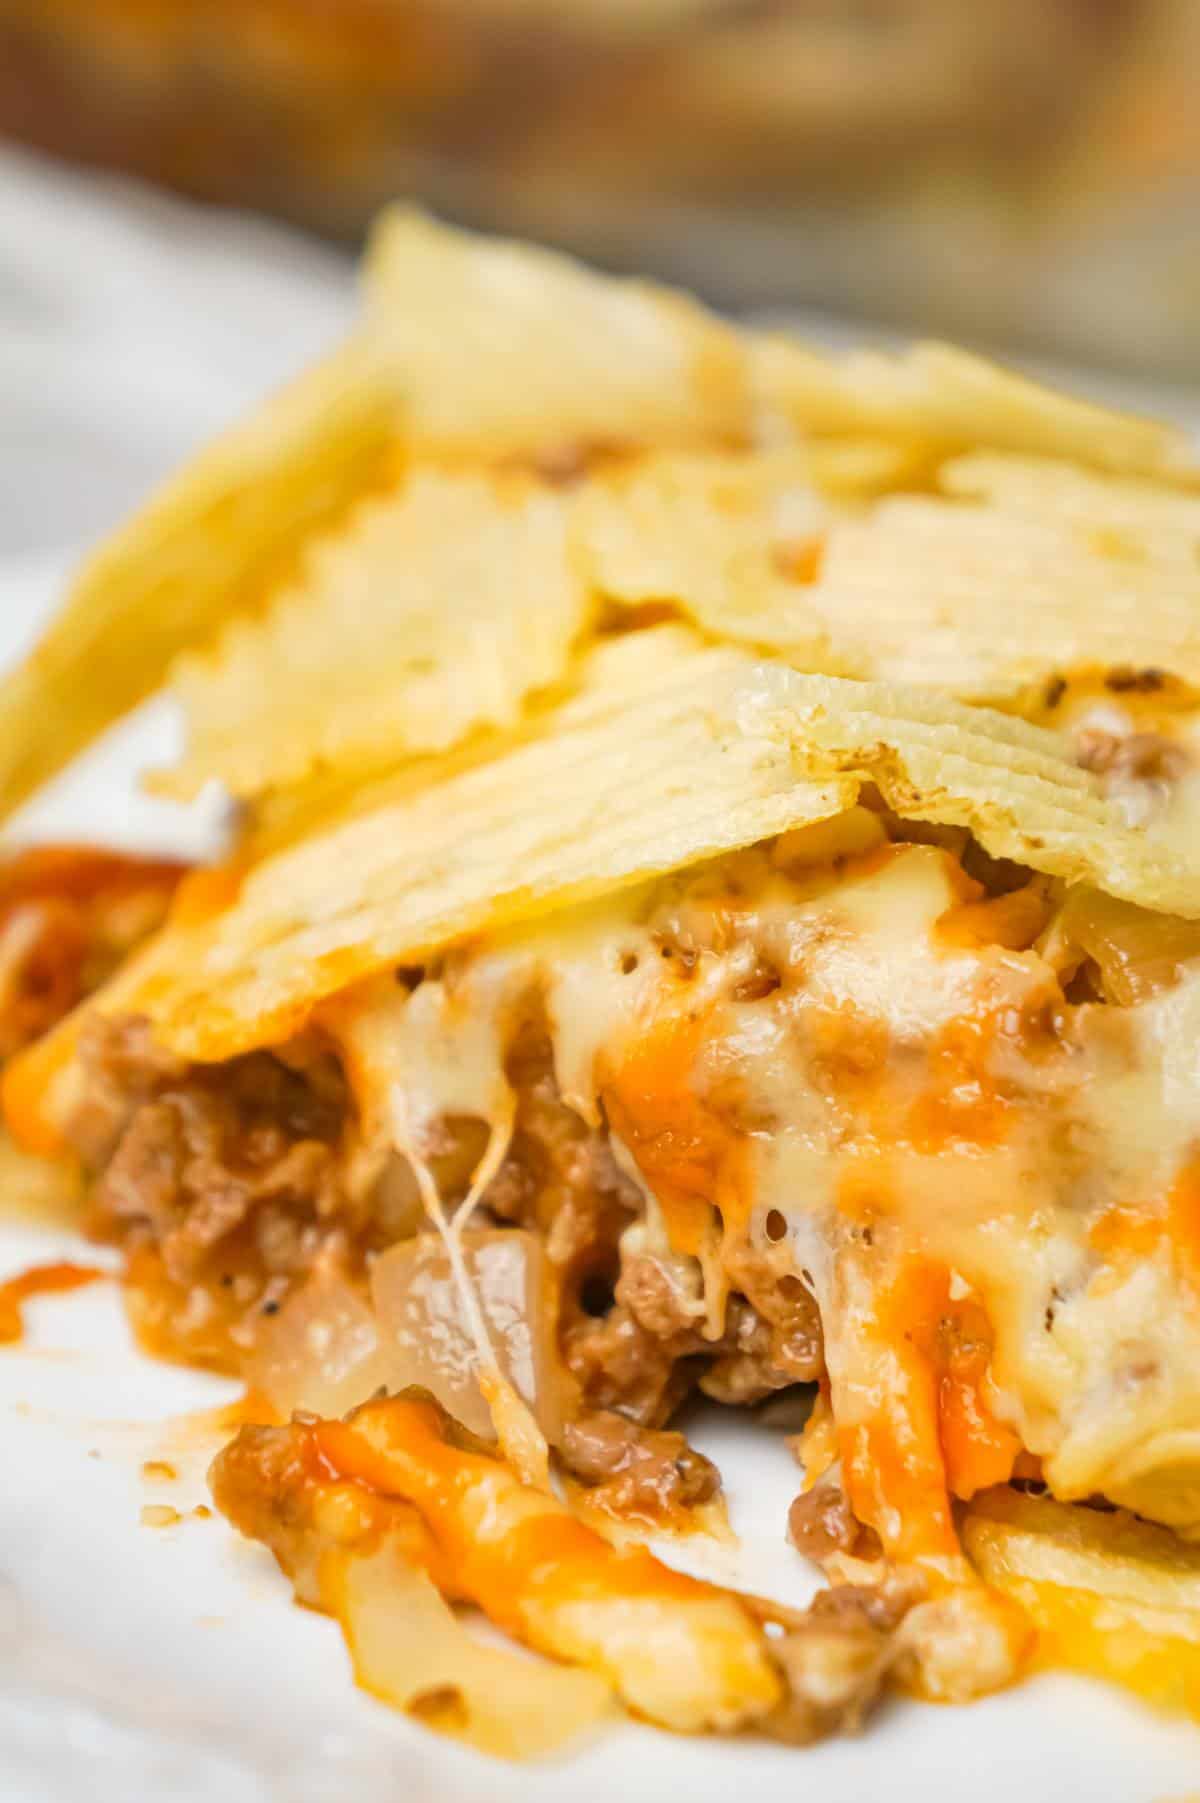 Cheeseburger Casserole with Potato Chips is an easy ground beef dinner recipe with a Bisquick base loaded with hamburger meat, diced onions, tomatoes and cheese all topped with ruffled potato chips.